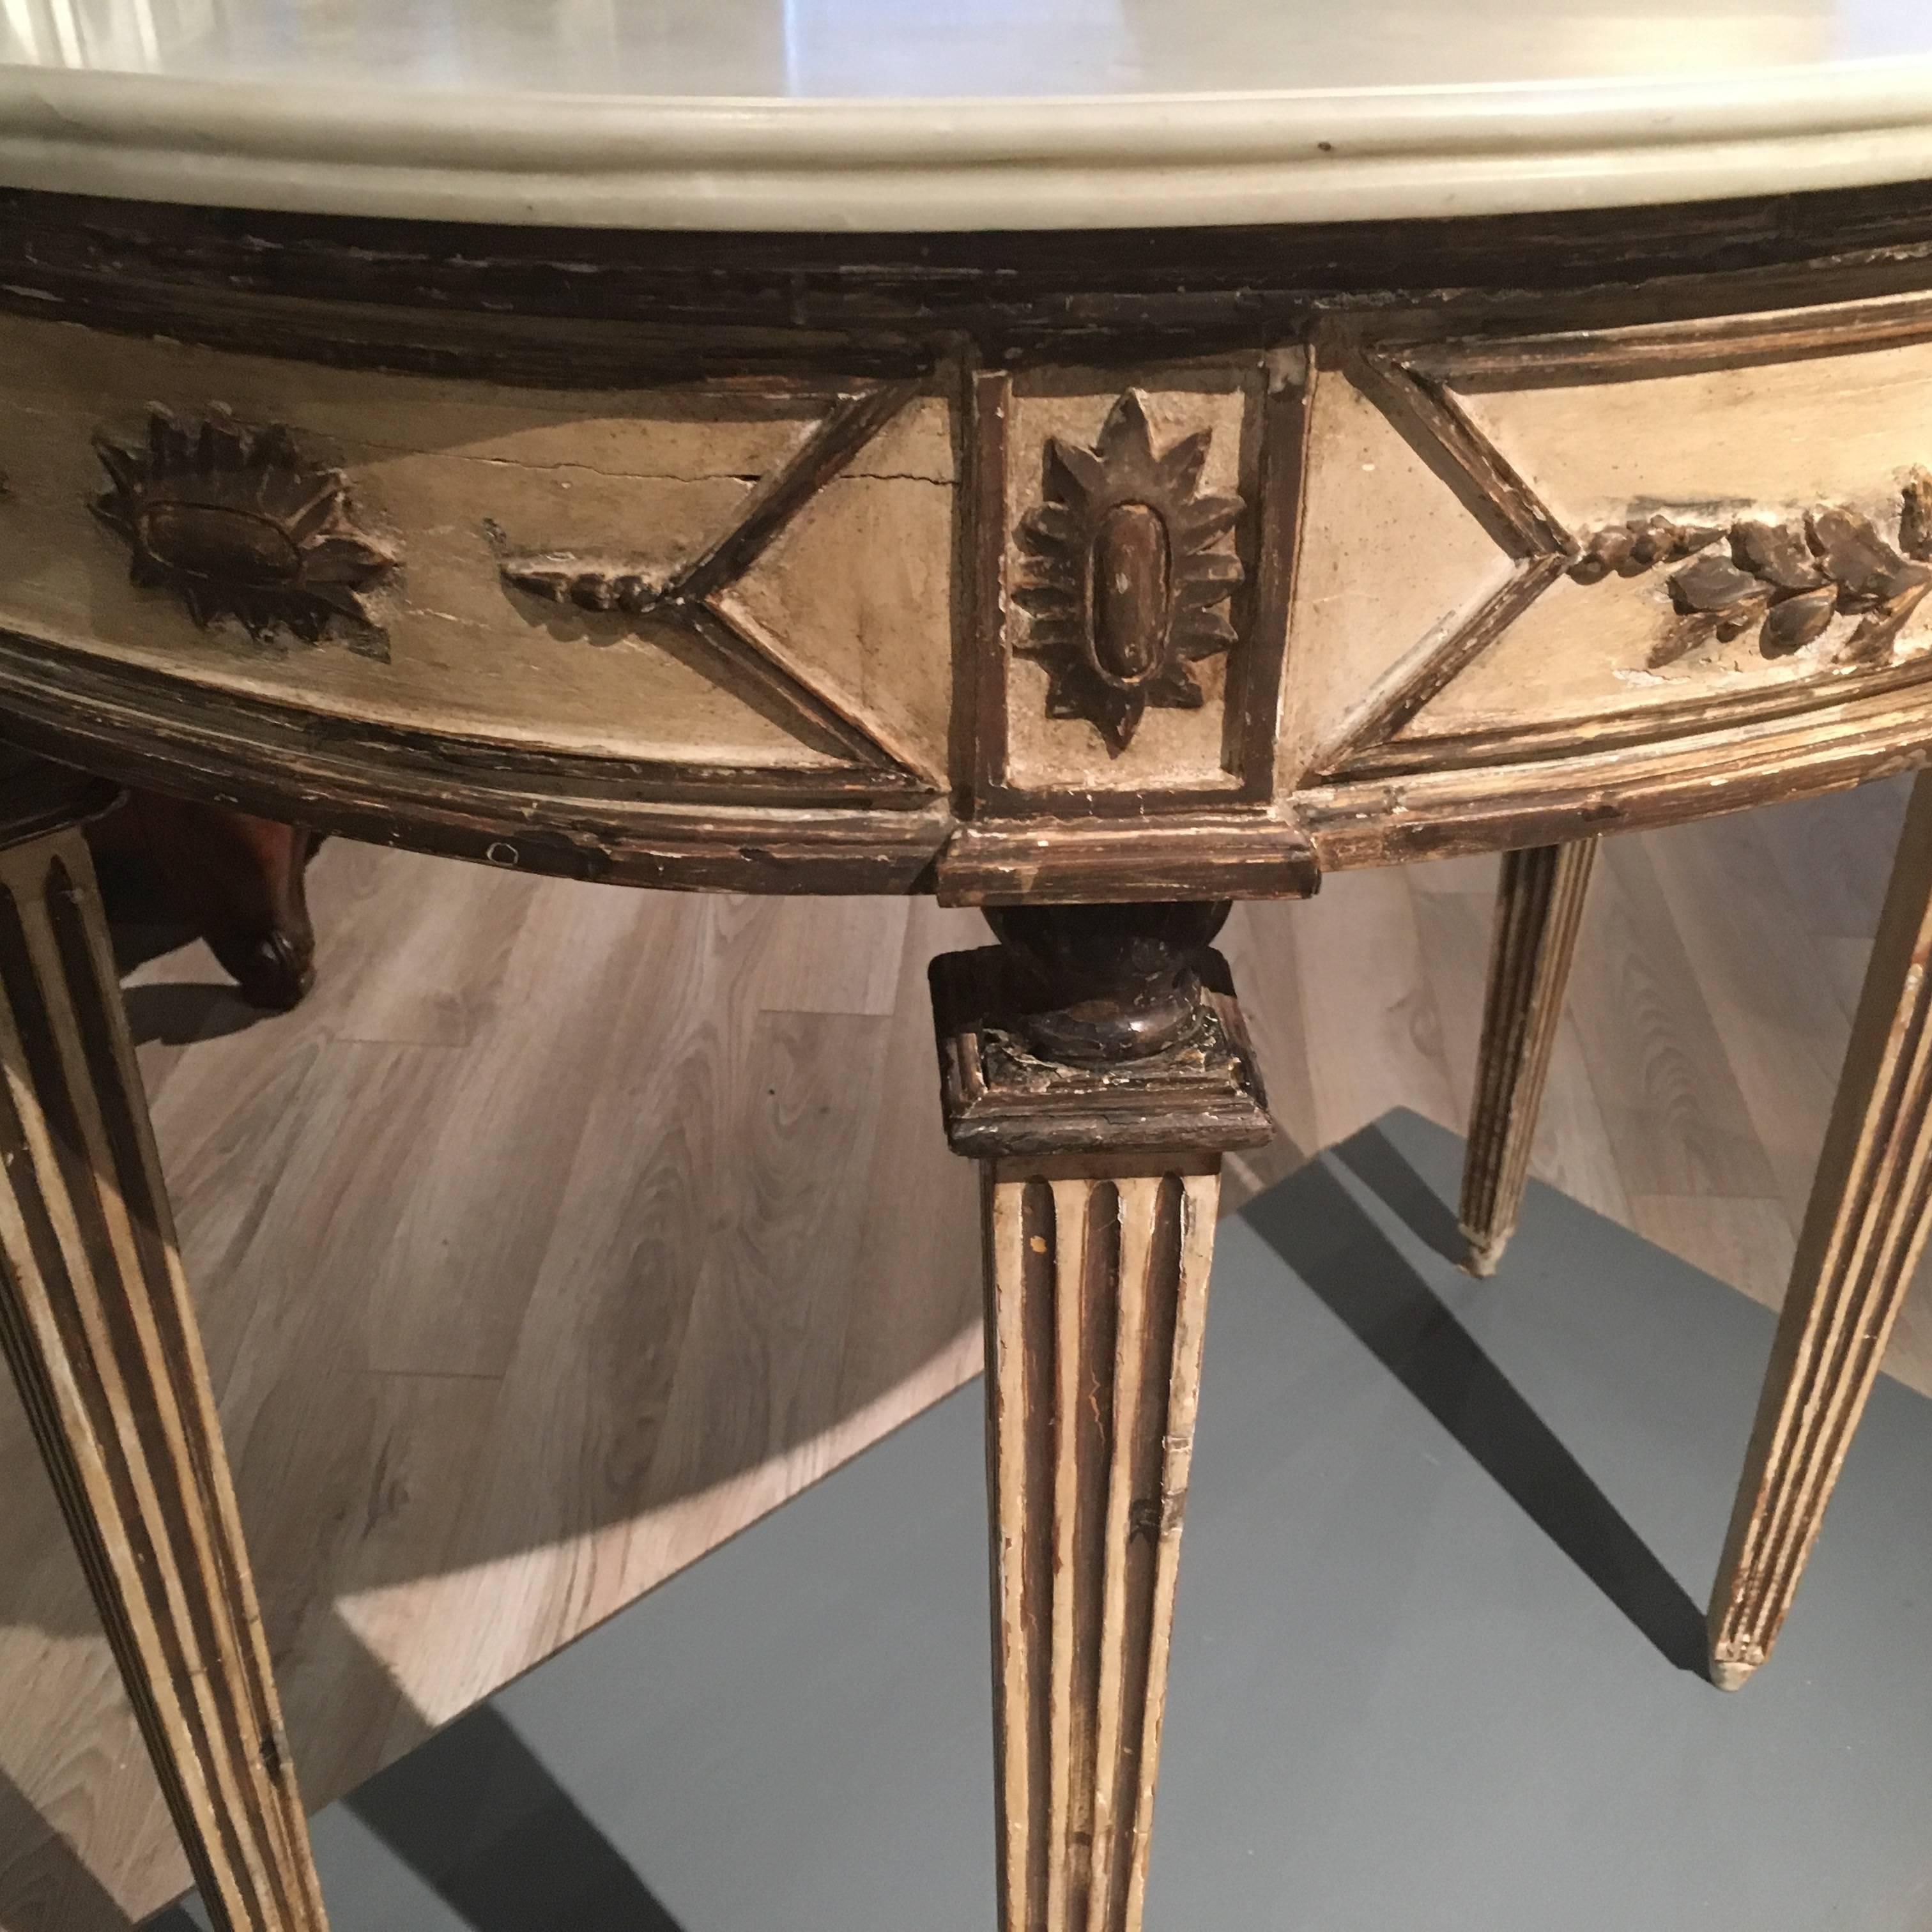 A very nice Italian early 19th century demilune console table with grisaille decoration of garlands and a central basket with square tapered and fluted legs and a white Carrara marble-top.